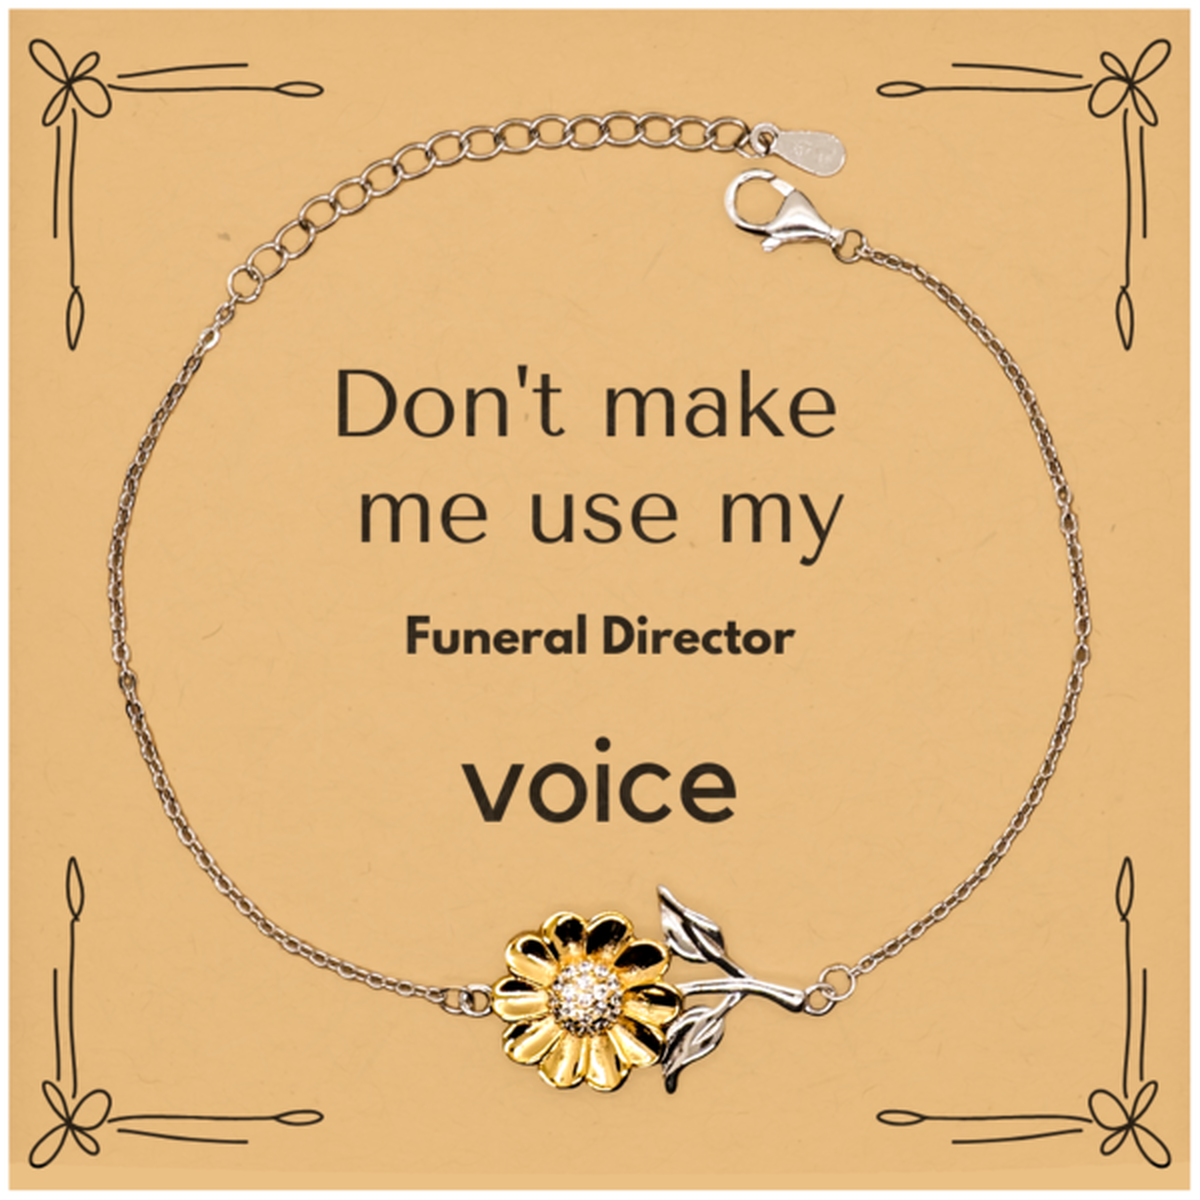 Don't make me use my Funeral Director voice, Sarcasm Funeral Director Card Gifts, Christmas Funeral Director Sunflower Bracelet Birthday Unique Gifts For Funeral Director Coworkers, Men, Women, Colleague, Friends